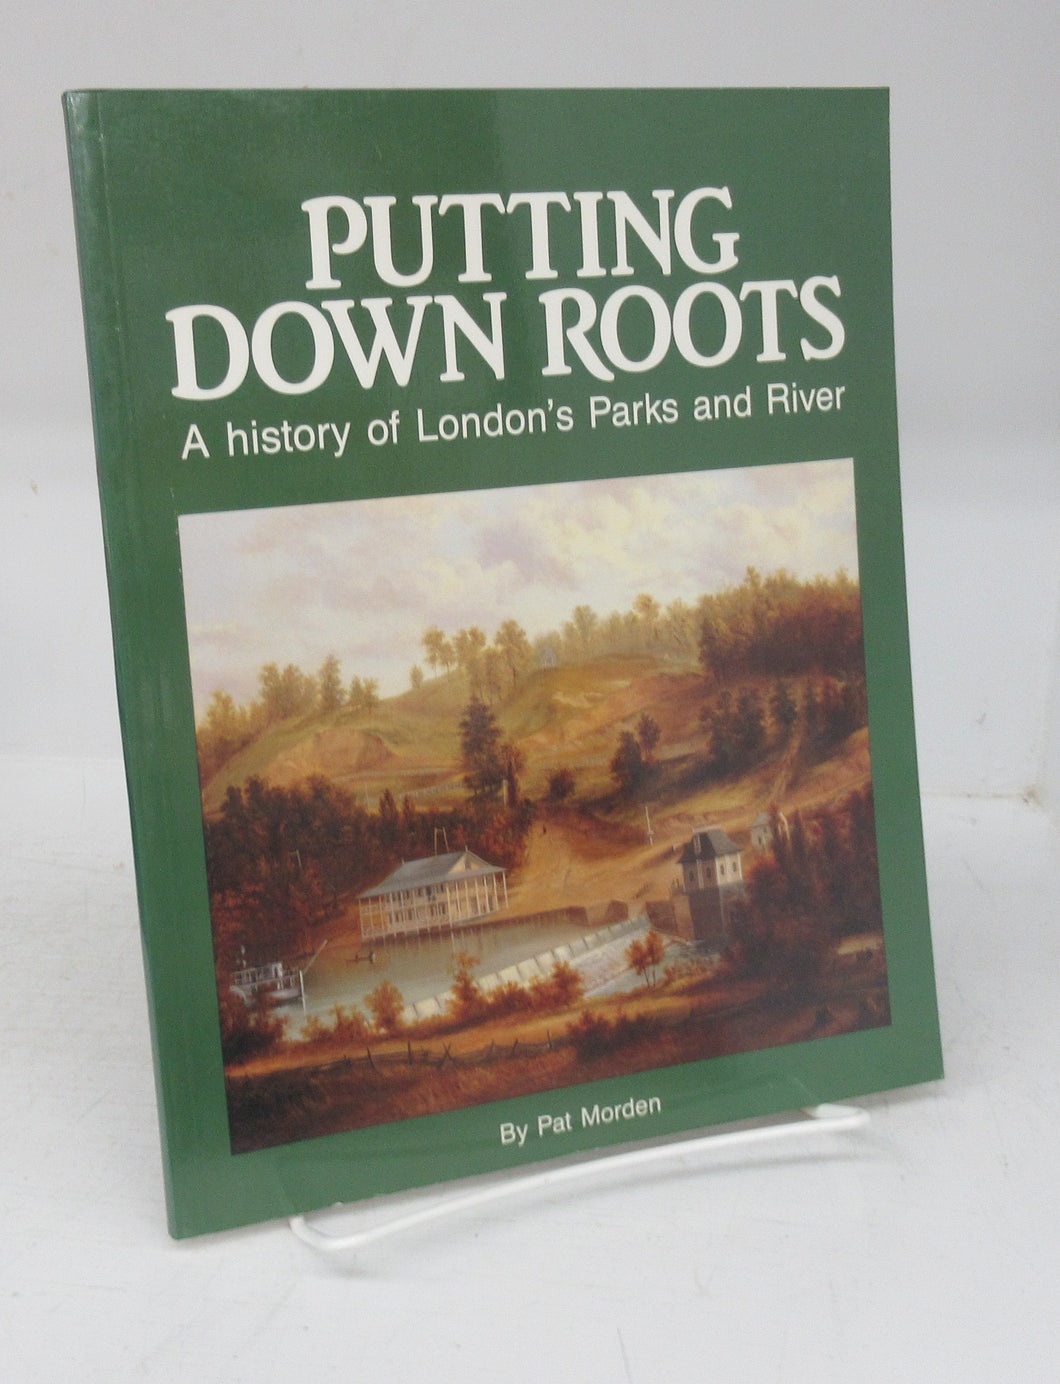 Putting Down Roots: A history of London's Parks and River